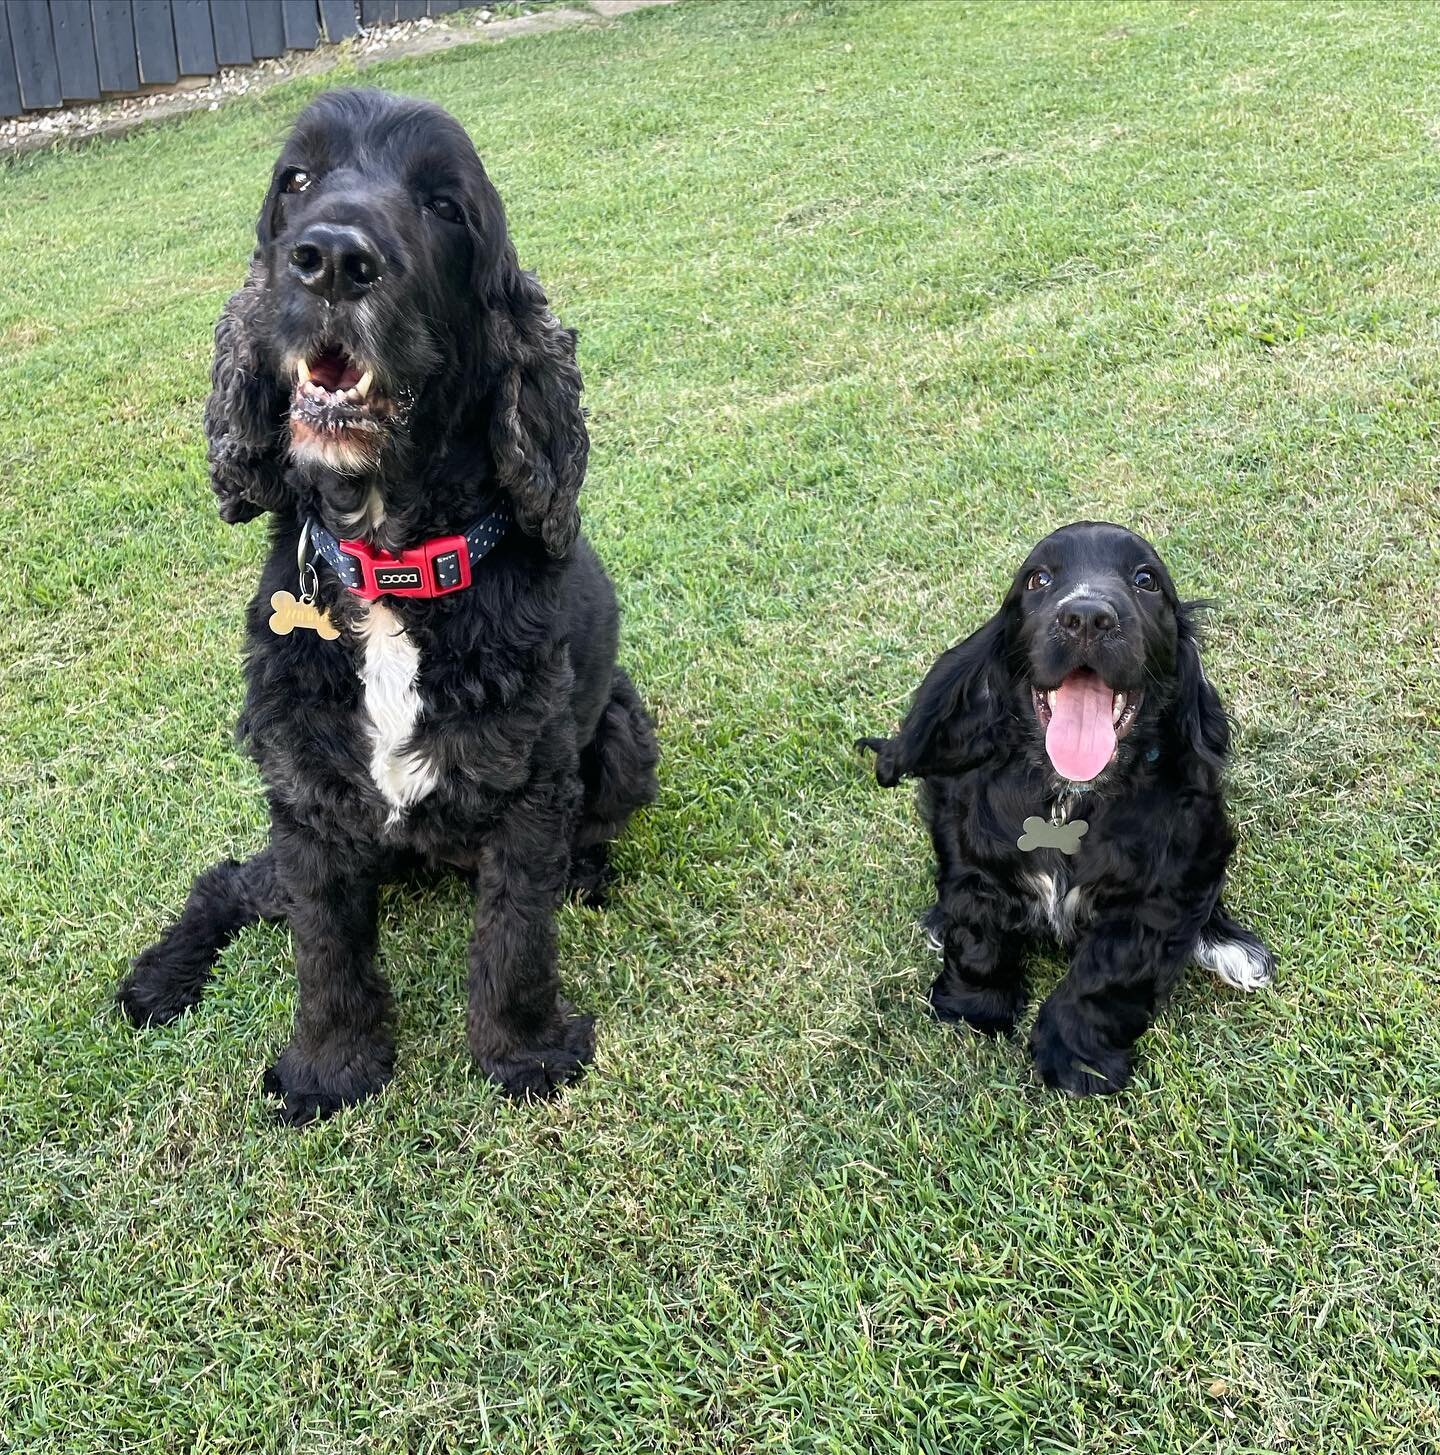 Weekend adventures of two Cocker Spaniels and their pal Ted! 🐾🐕&zwj;🦺🧸
.
.
.
.
.
#dogdaycarebrisbane #dogwalkerbrisbane #dogsofbrisbane #dogsofpaddington #dogdaycarepaddington #dogwalkerpaddington #brisbanepuppies #dogtrainer #dogtrainerbrisbane 